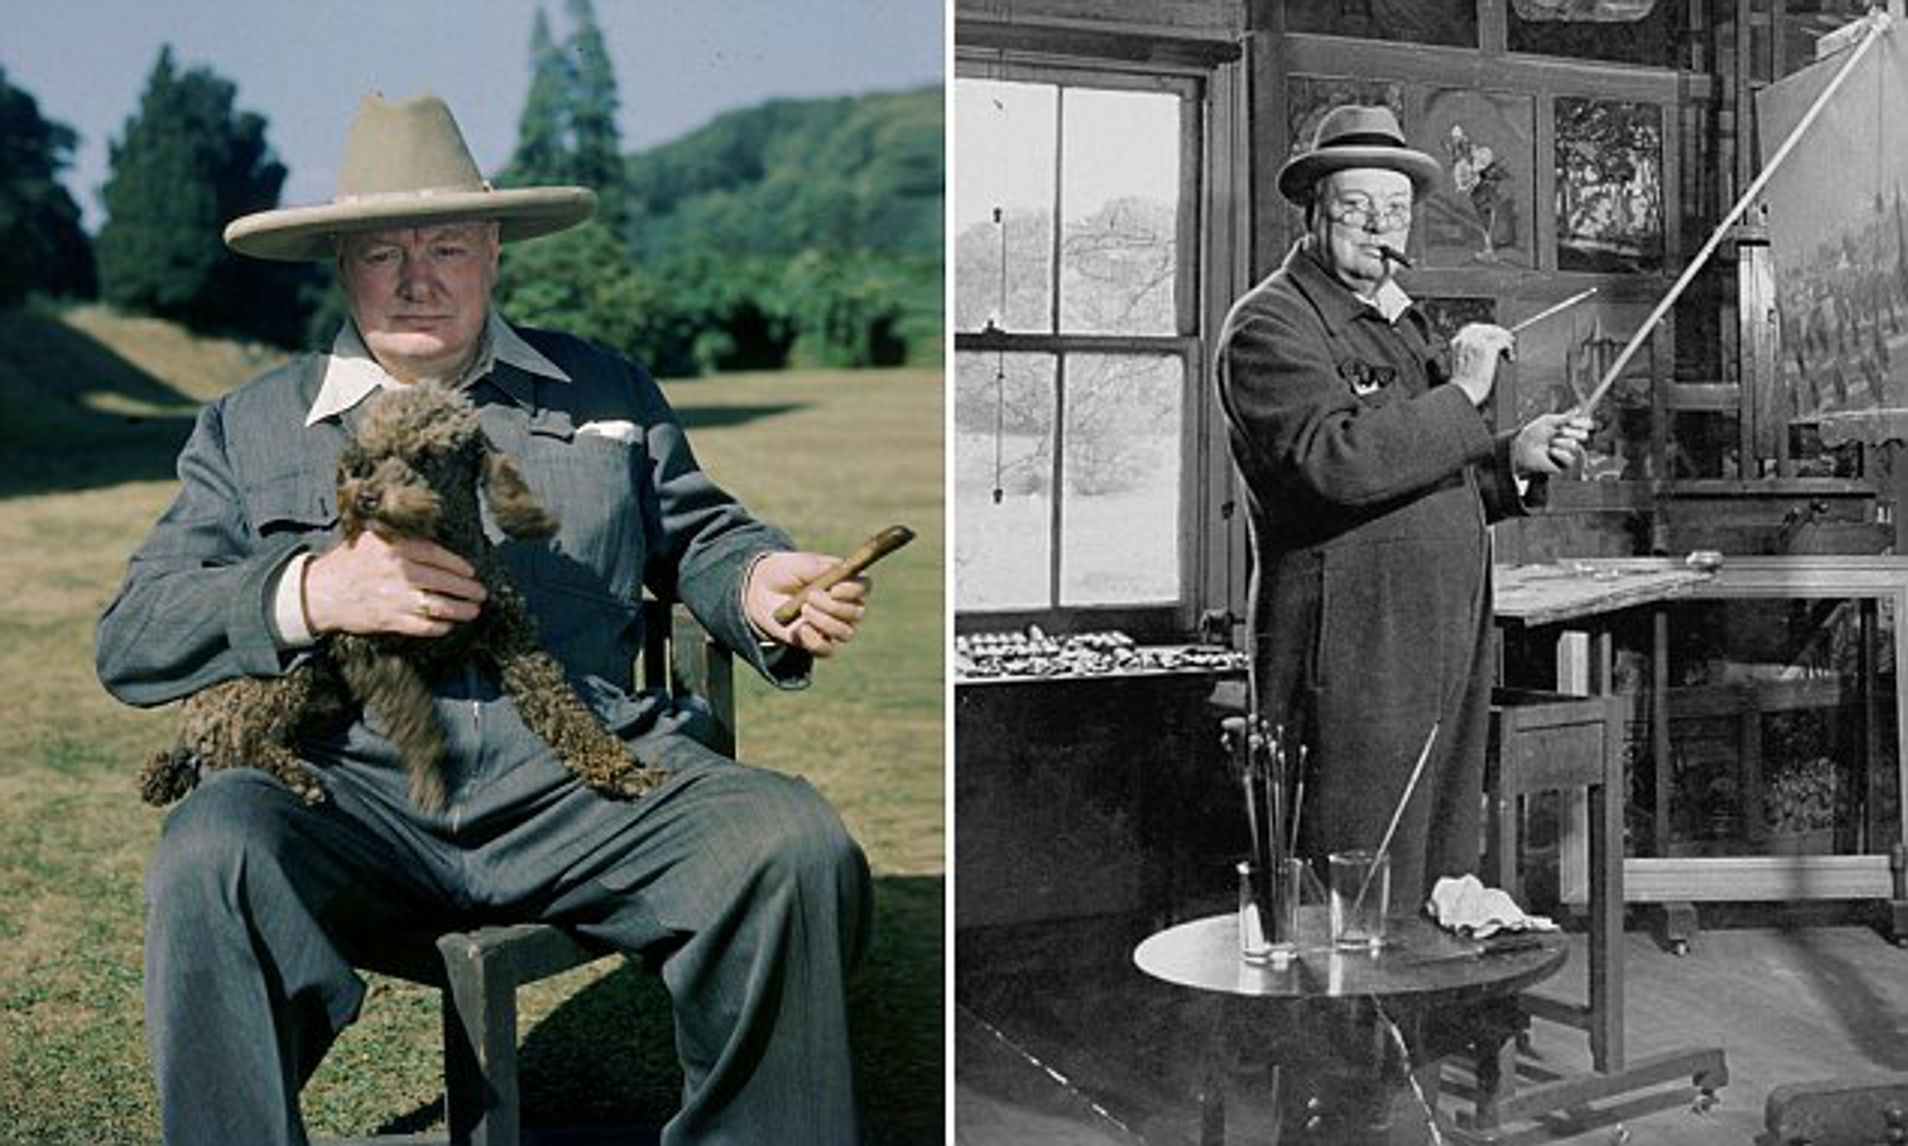 Winston Churchill invented, designed, and named the Romper